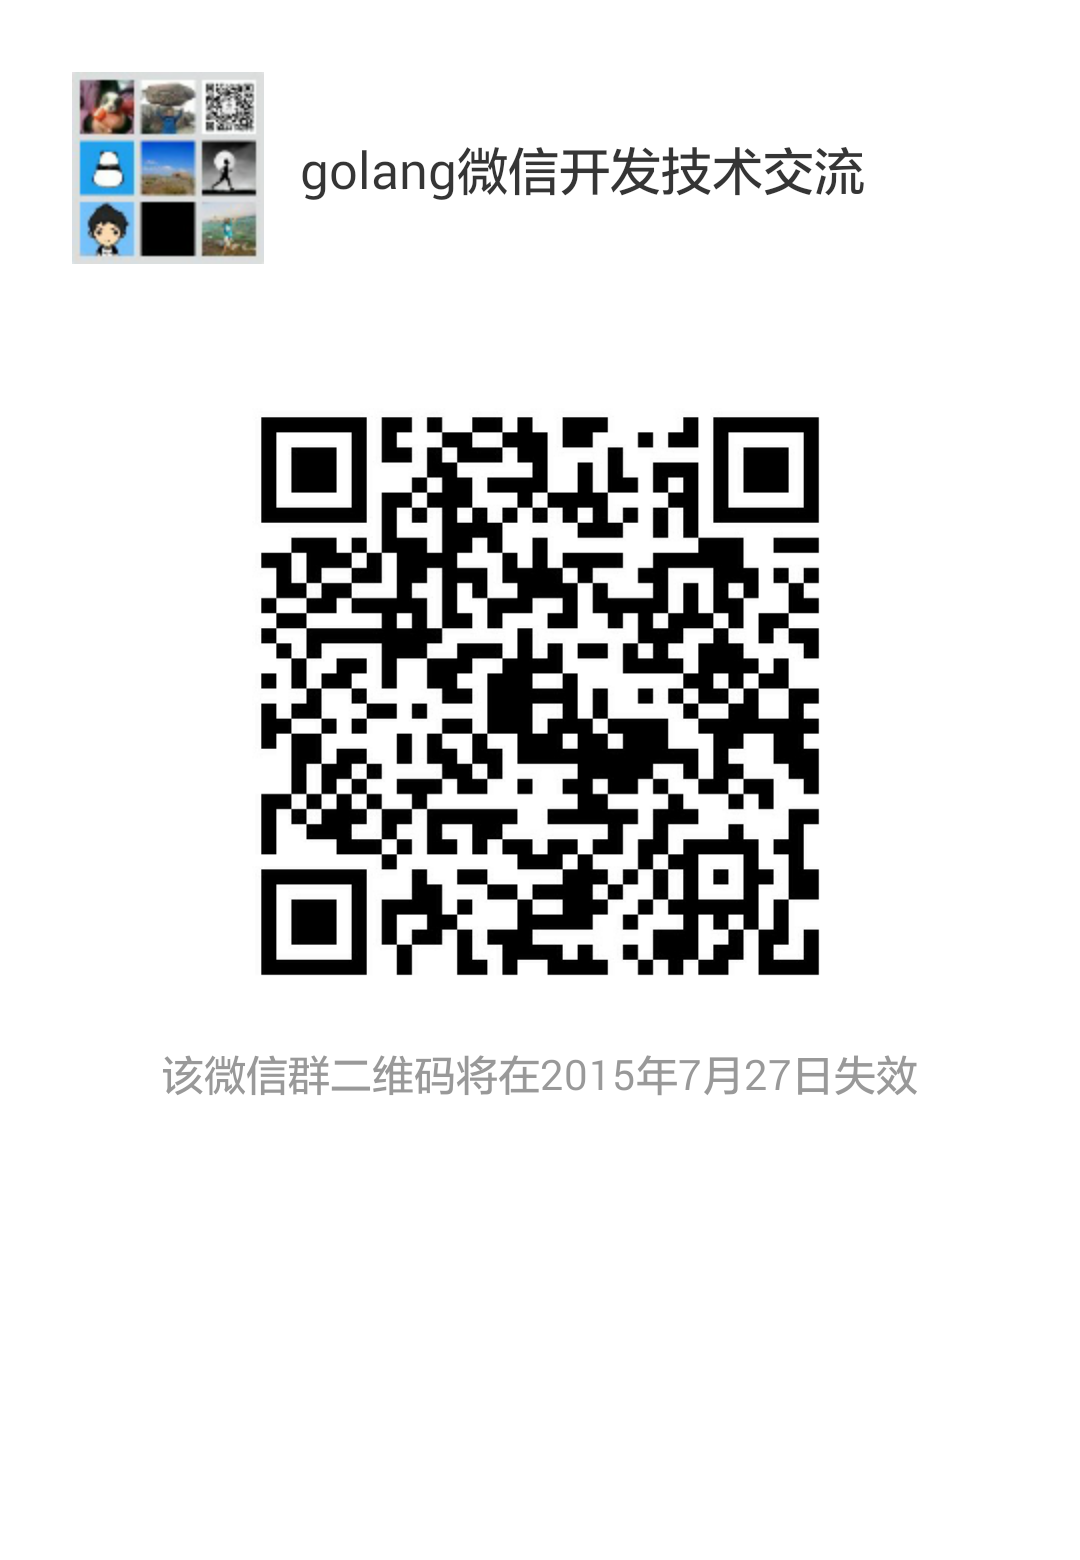 mmqrcode1437405773353.png